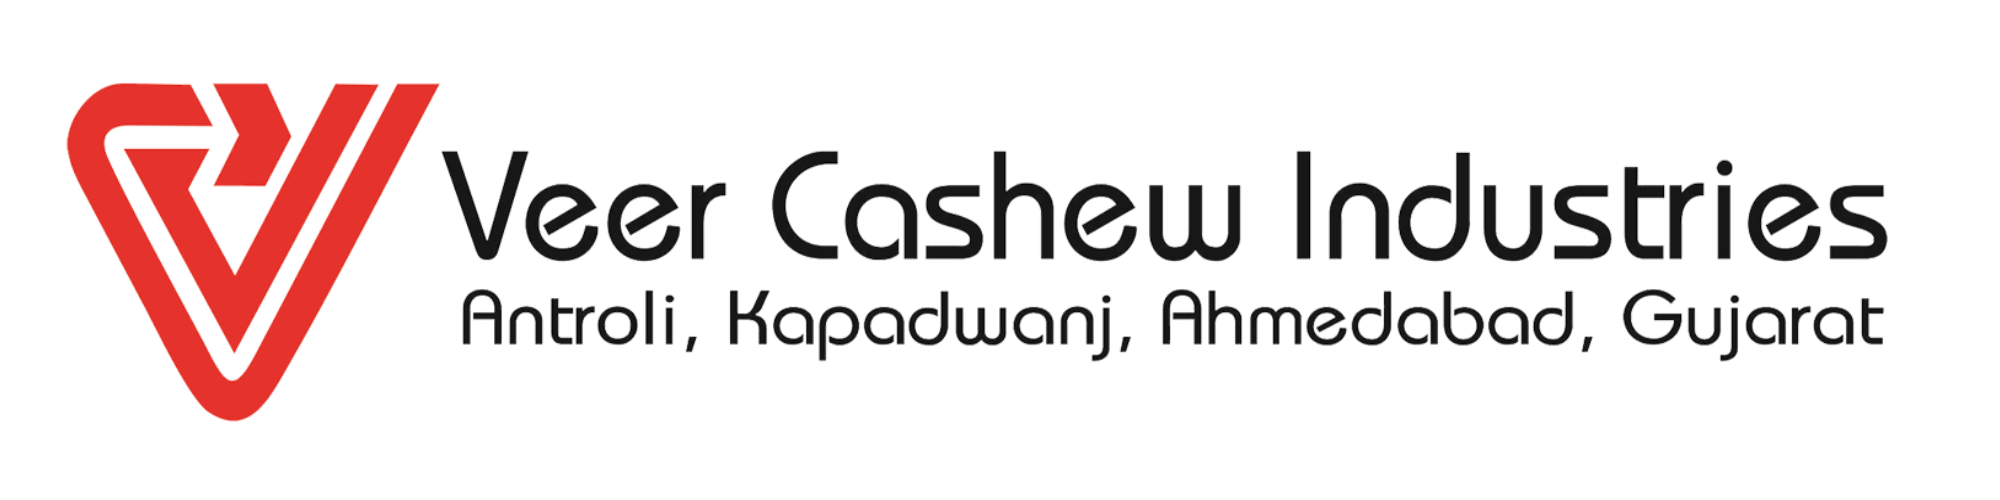 Company Logo For Veer Cashew Industries'